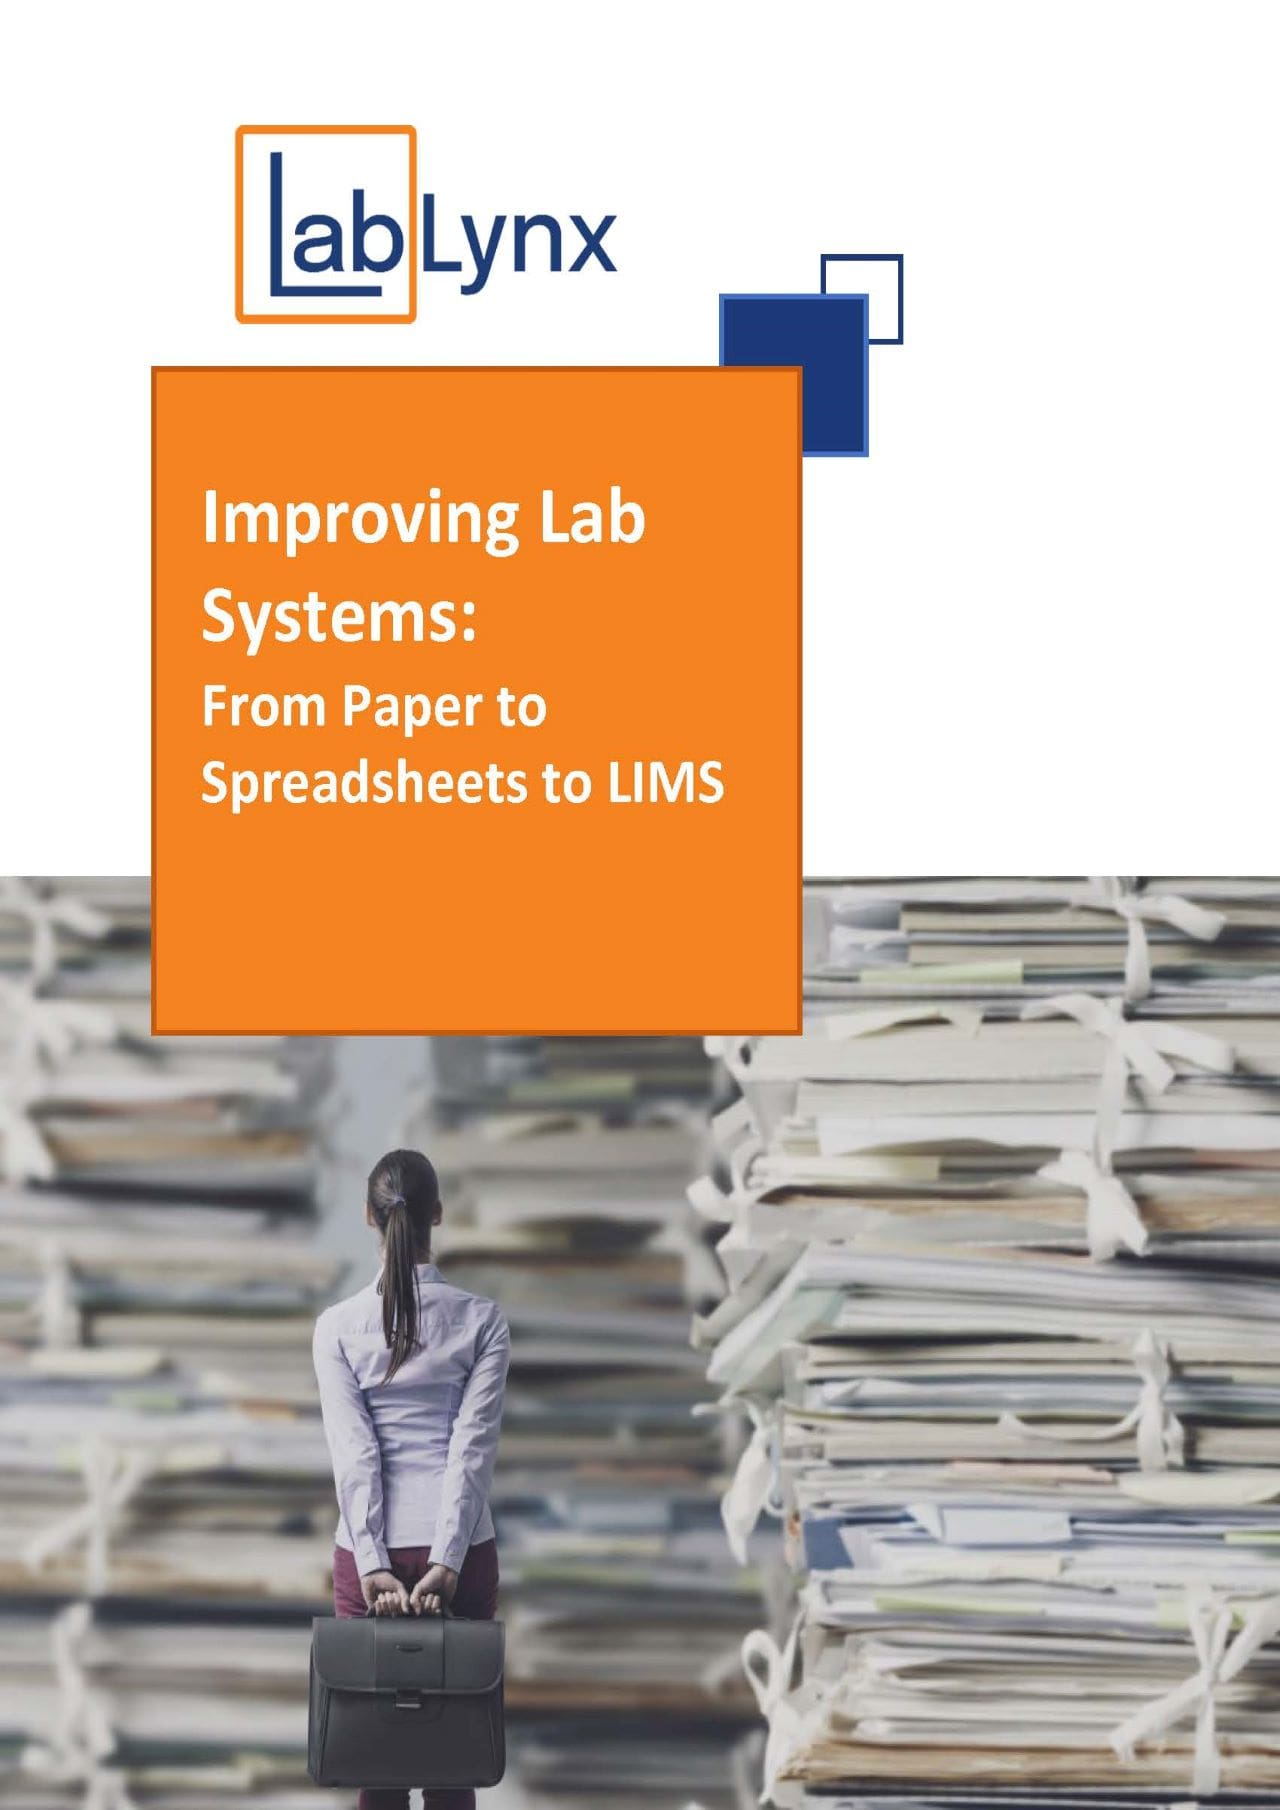 Improving Lab Systems: From Paper to Spreadsheets to LIMS | Brochures | LabLynx